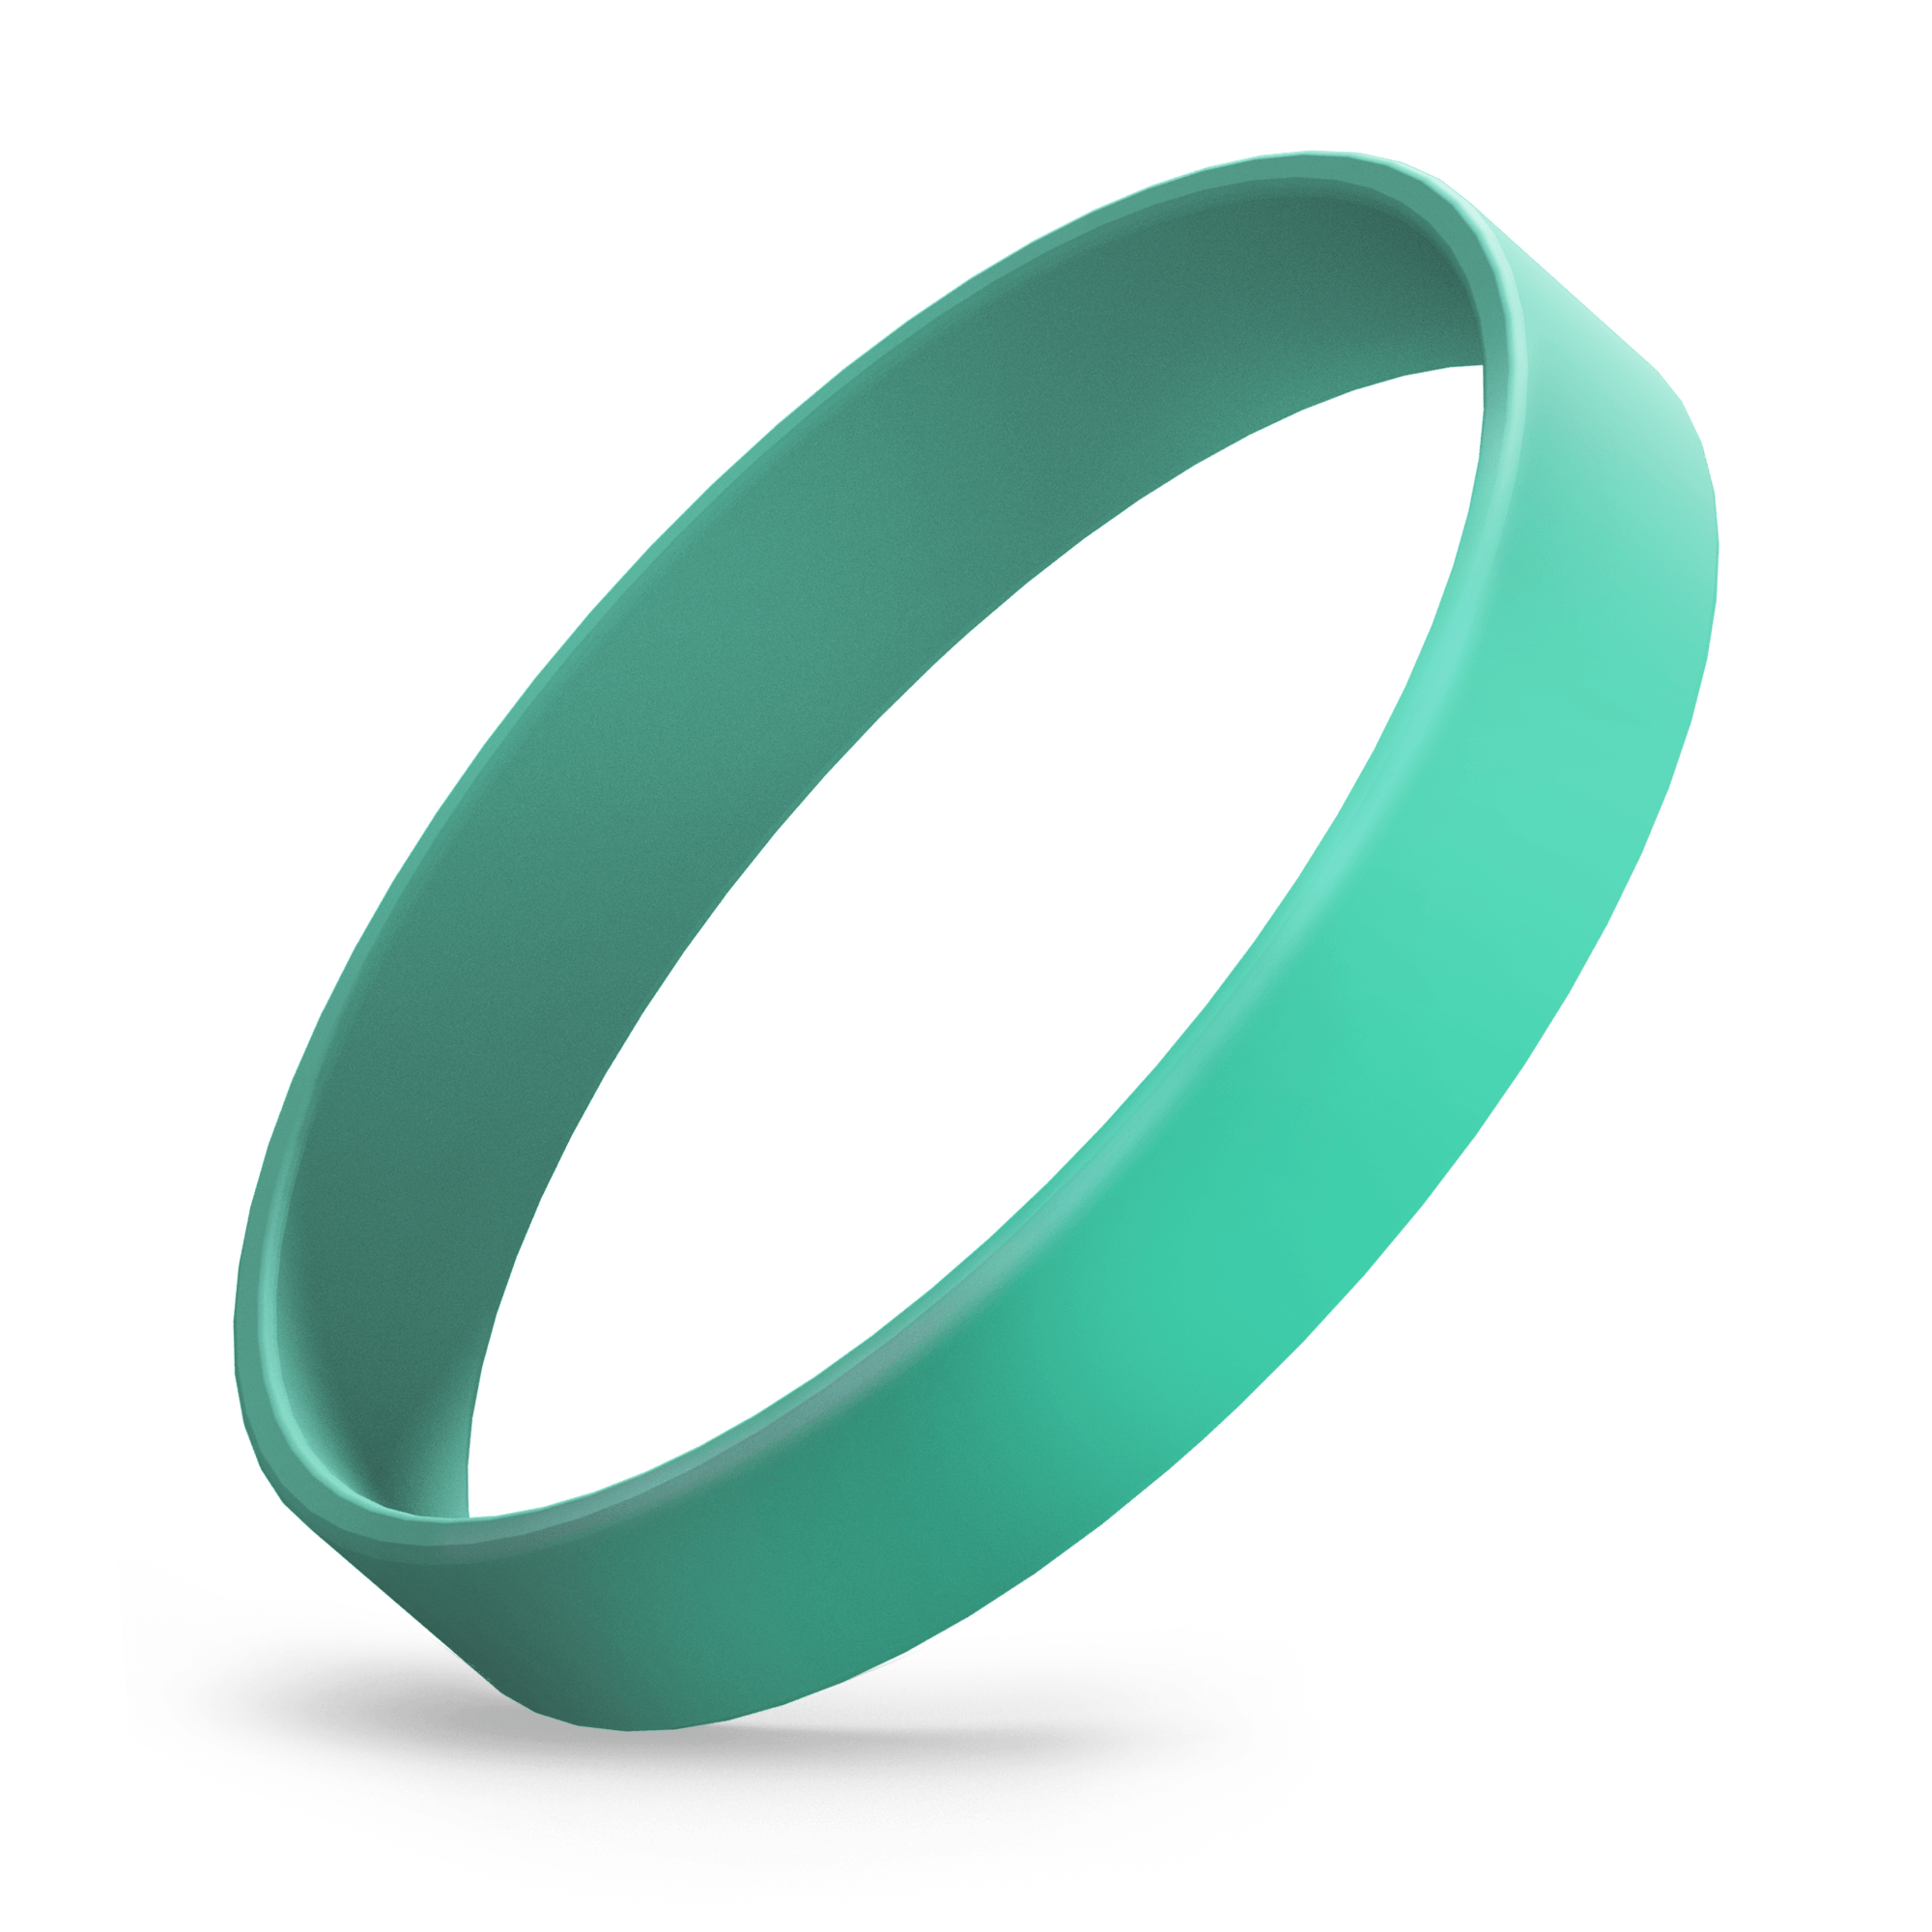 Custom Printed (Seafoam Green) Silicone Wristbands - Rubber Bracelets by Wristband Resources